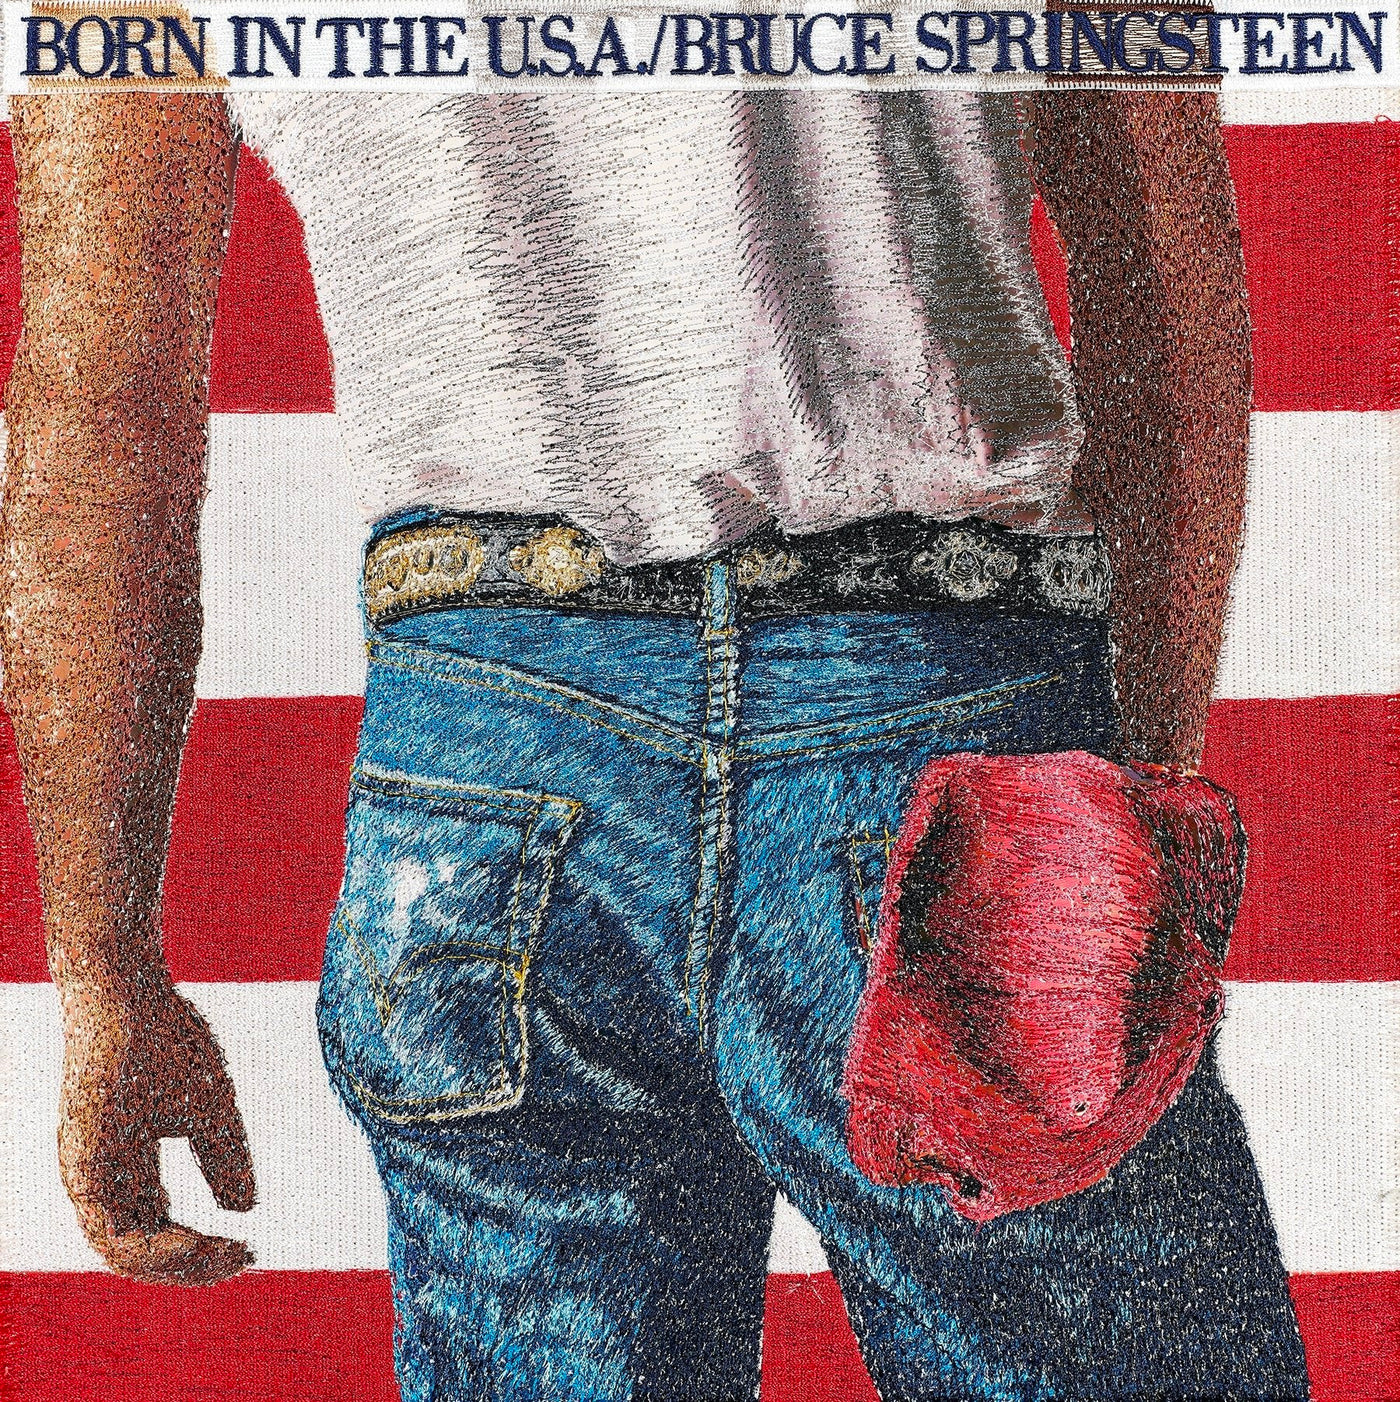 Born In The U.S.A - Bruce Springsteen V4